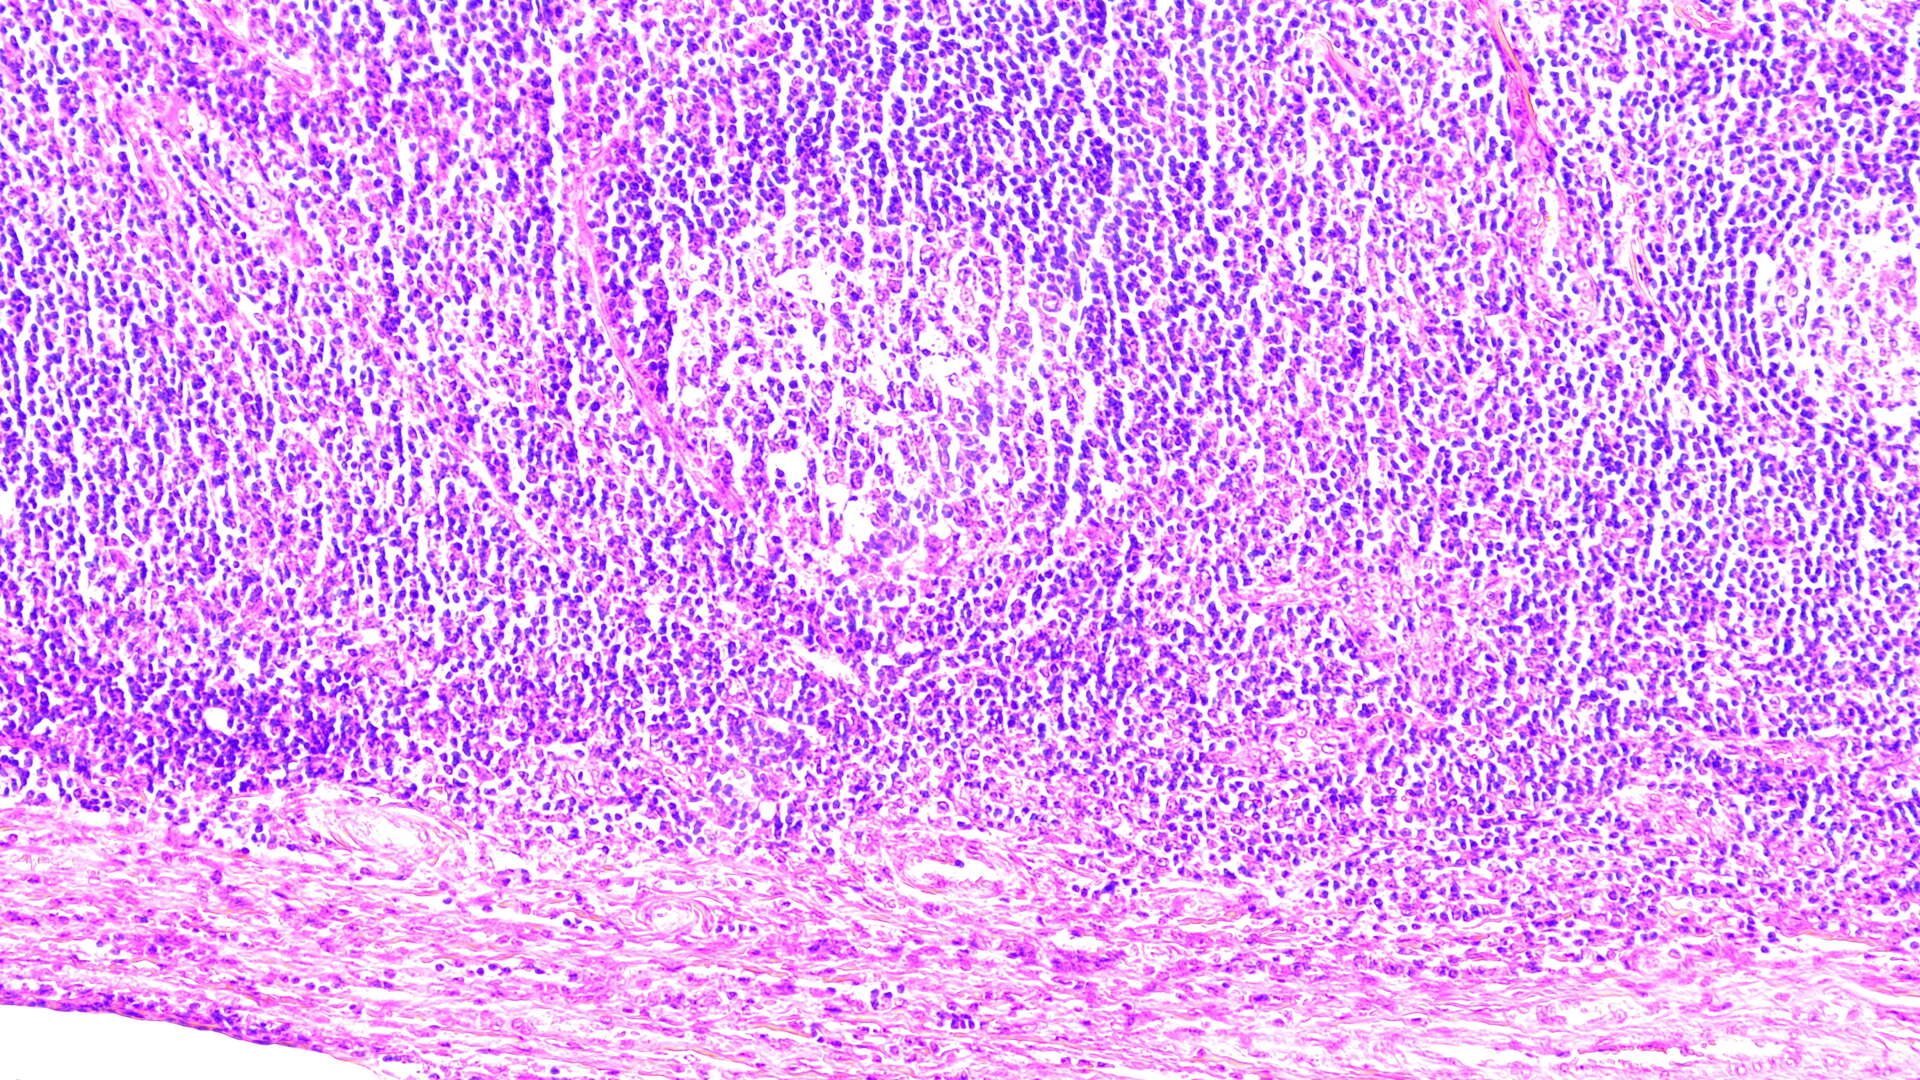 H&E staining image